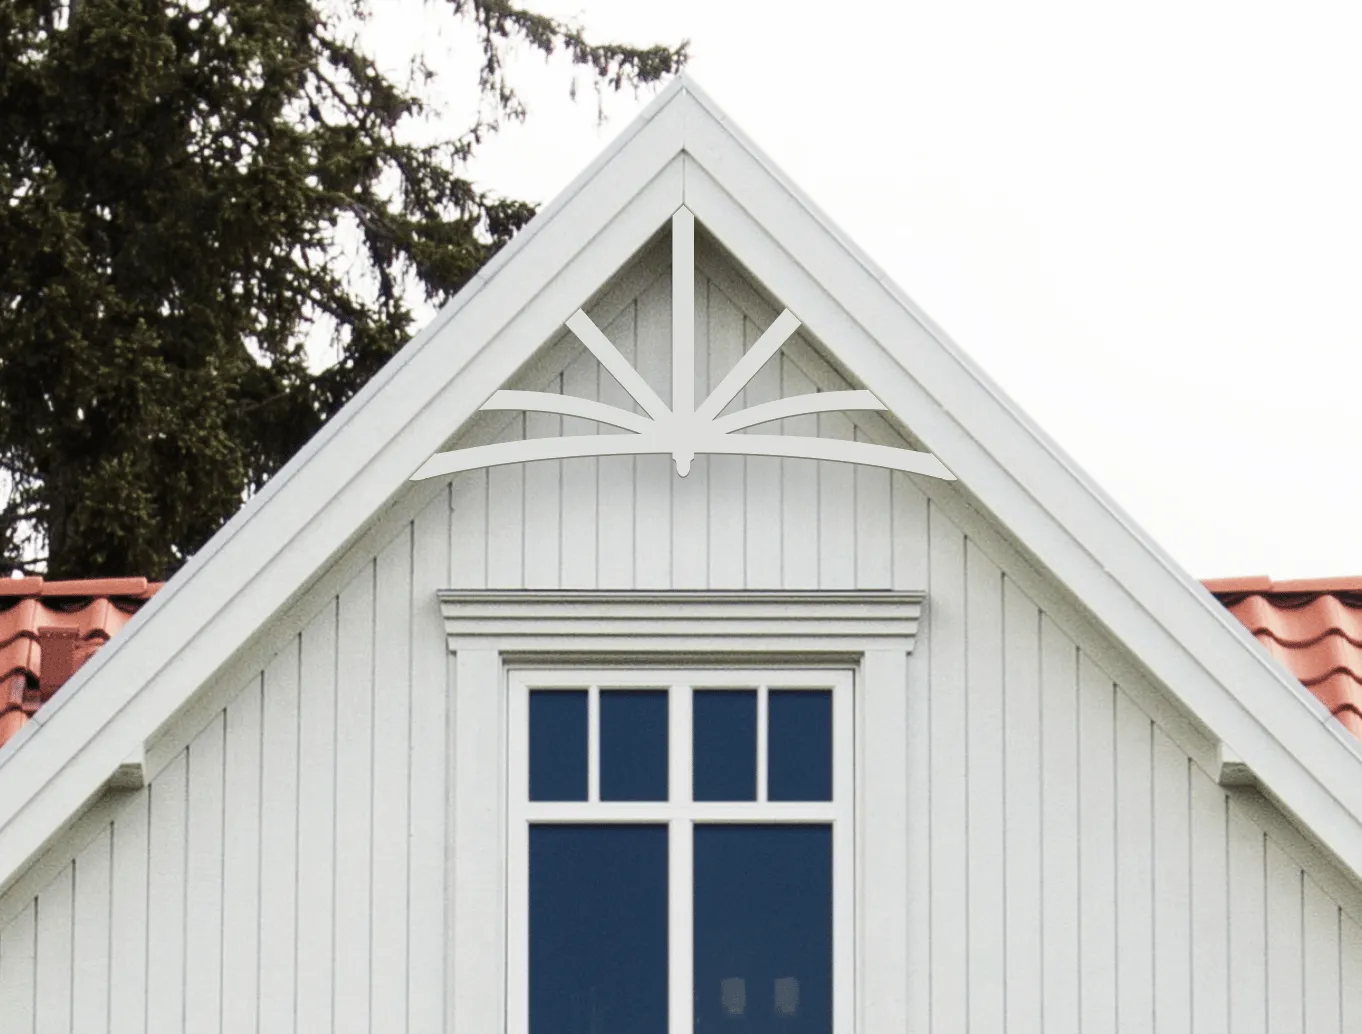 Gable pediment 003 - A white house with decorative wooden victorian millwork as house decoration for roof and gable end.